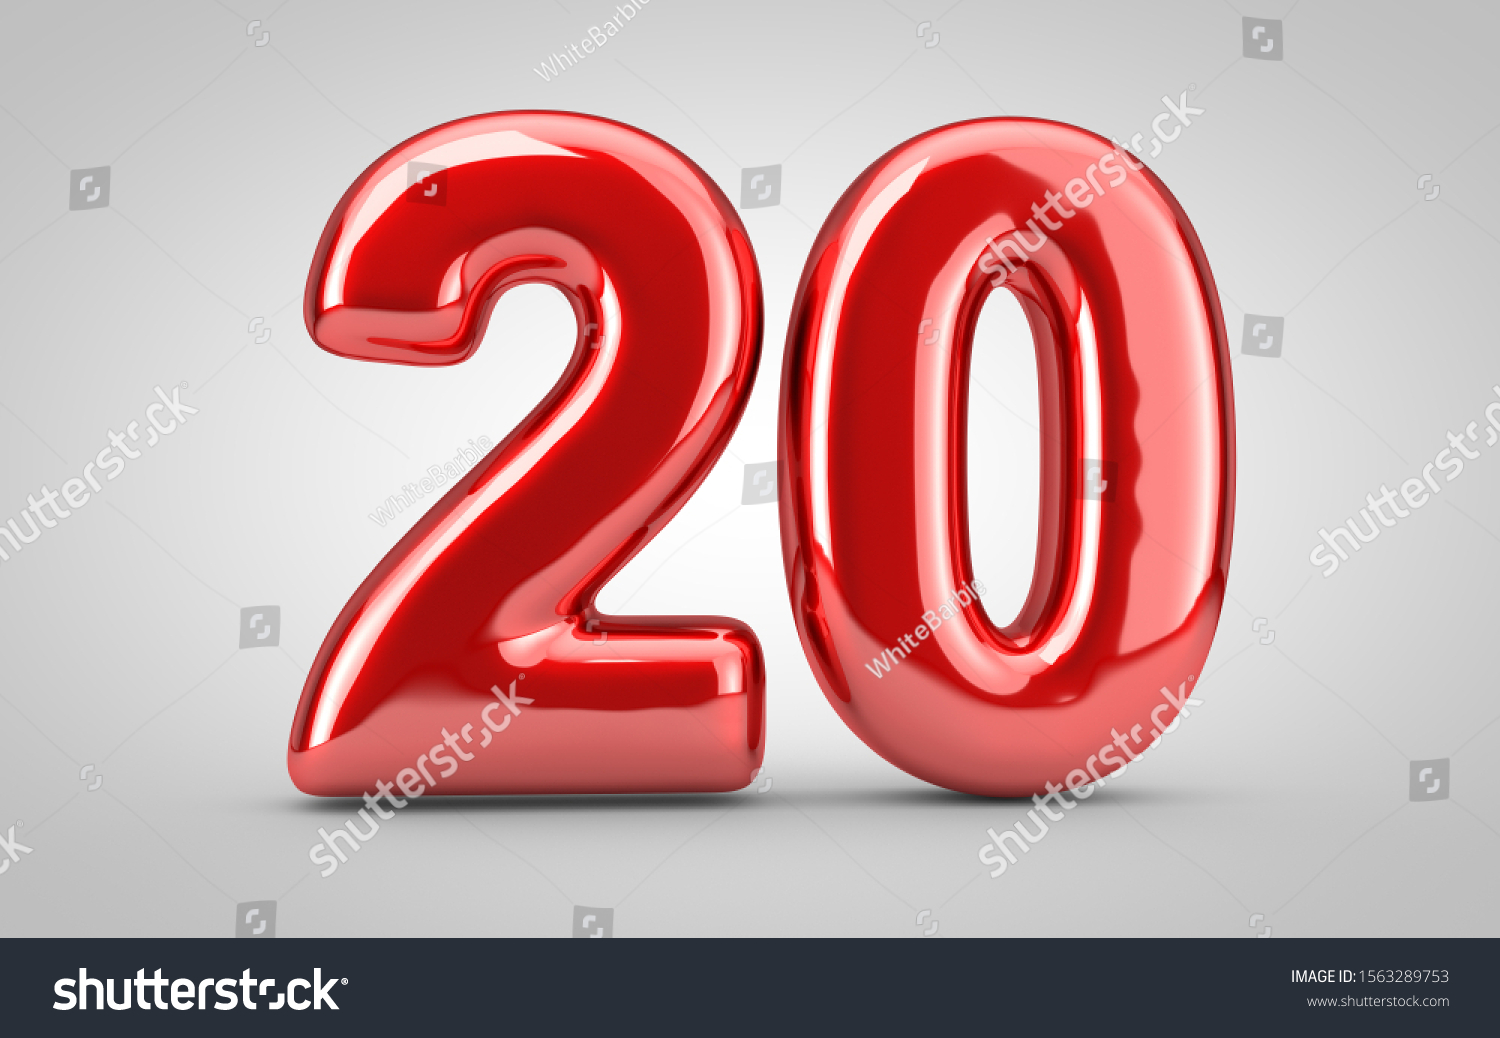 Red Glossy Balloon Number 20 Isolated Stock Illustration 1563289753 ...